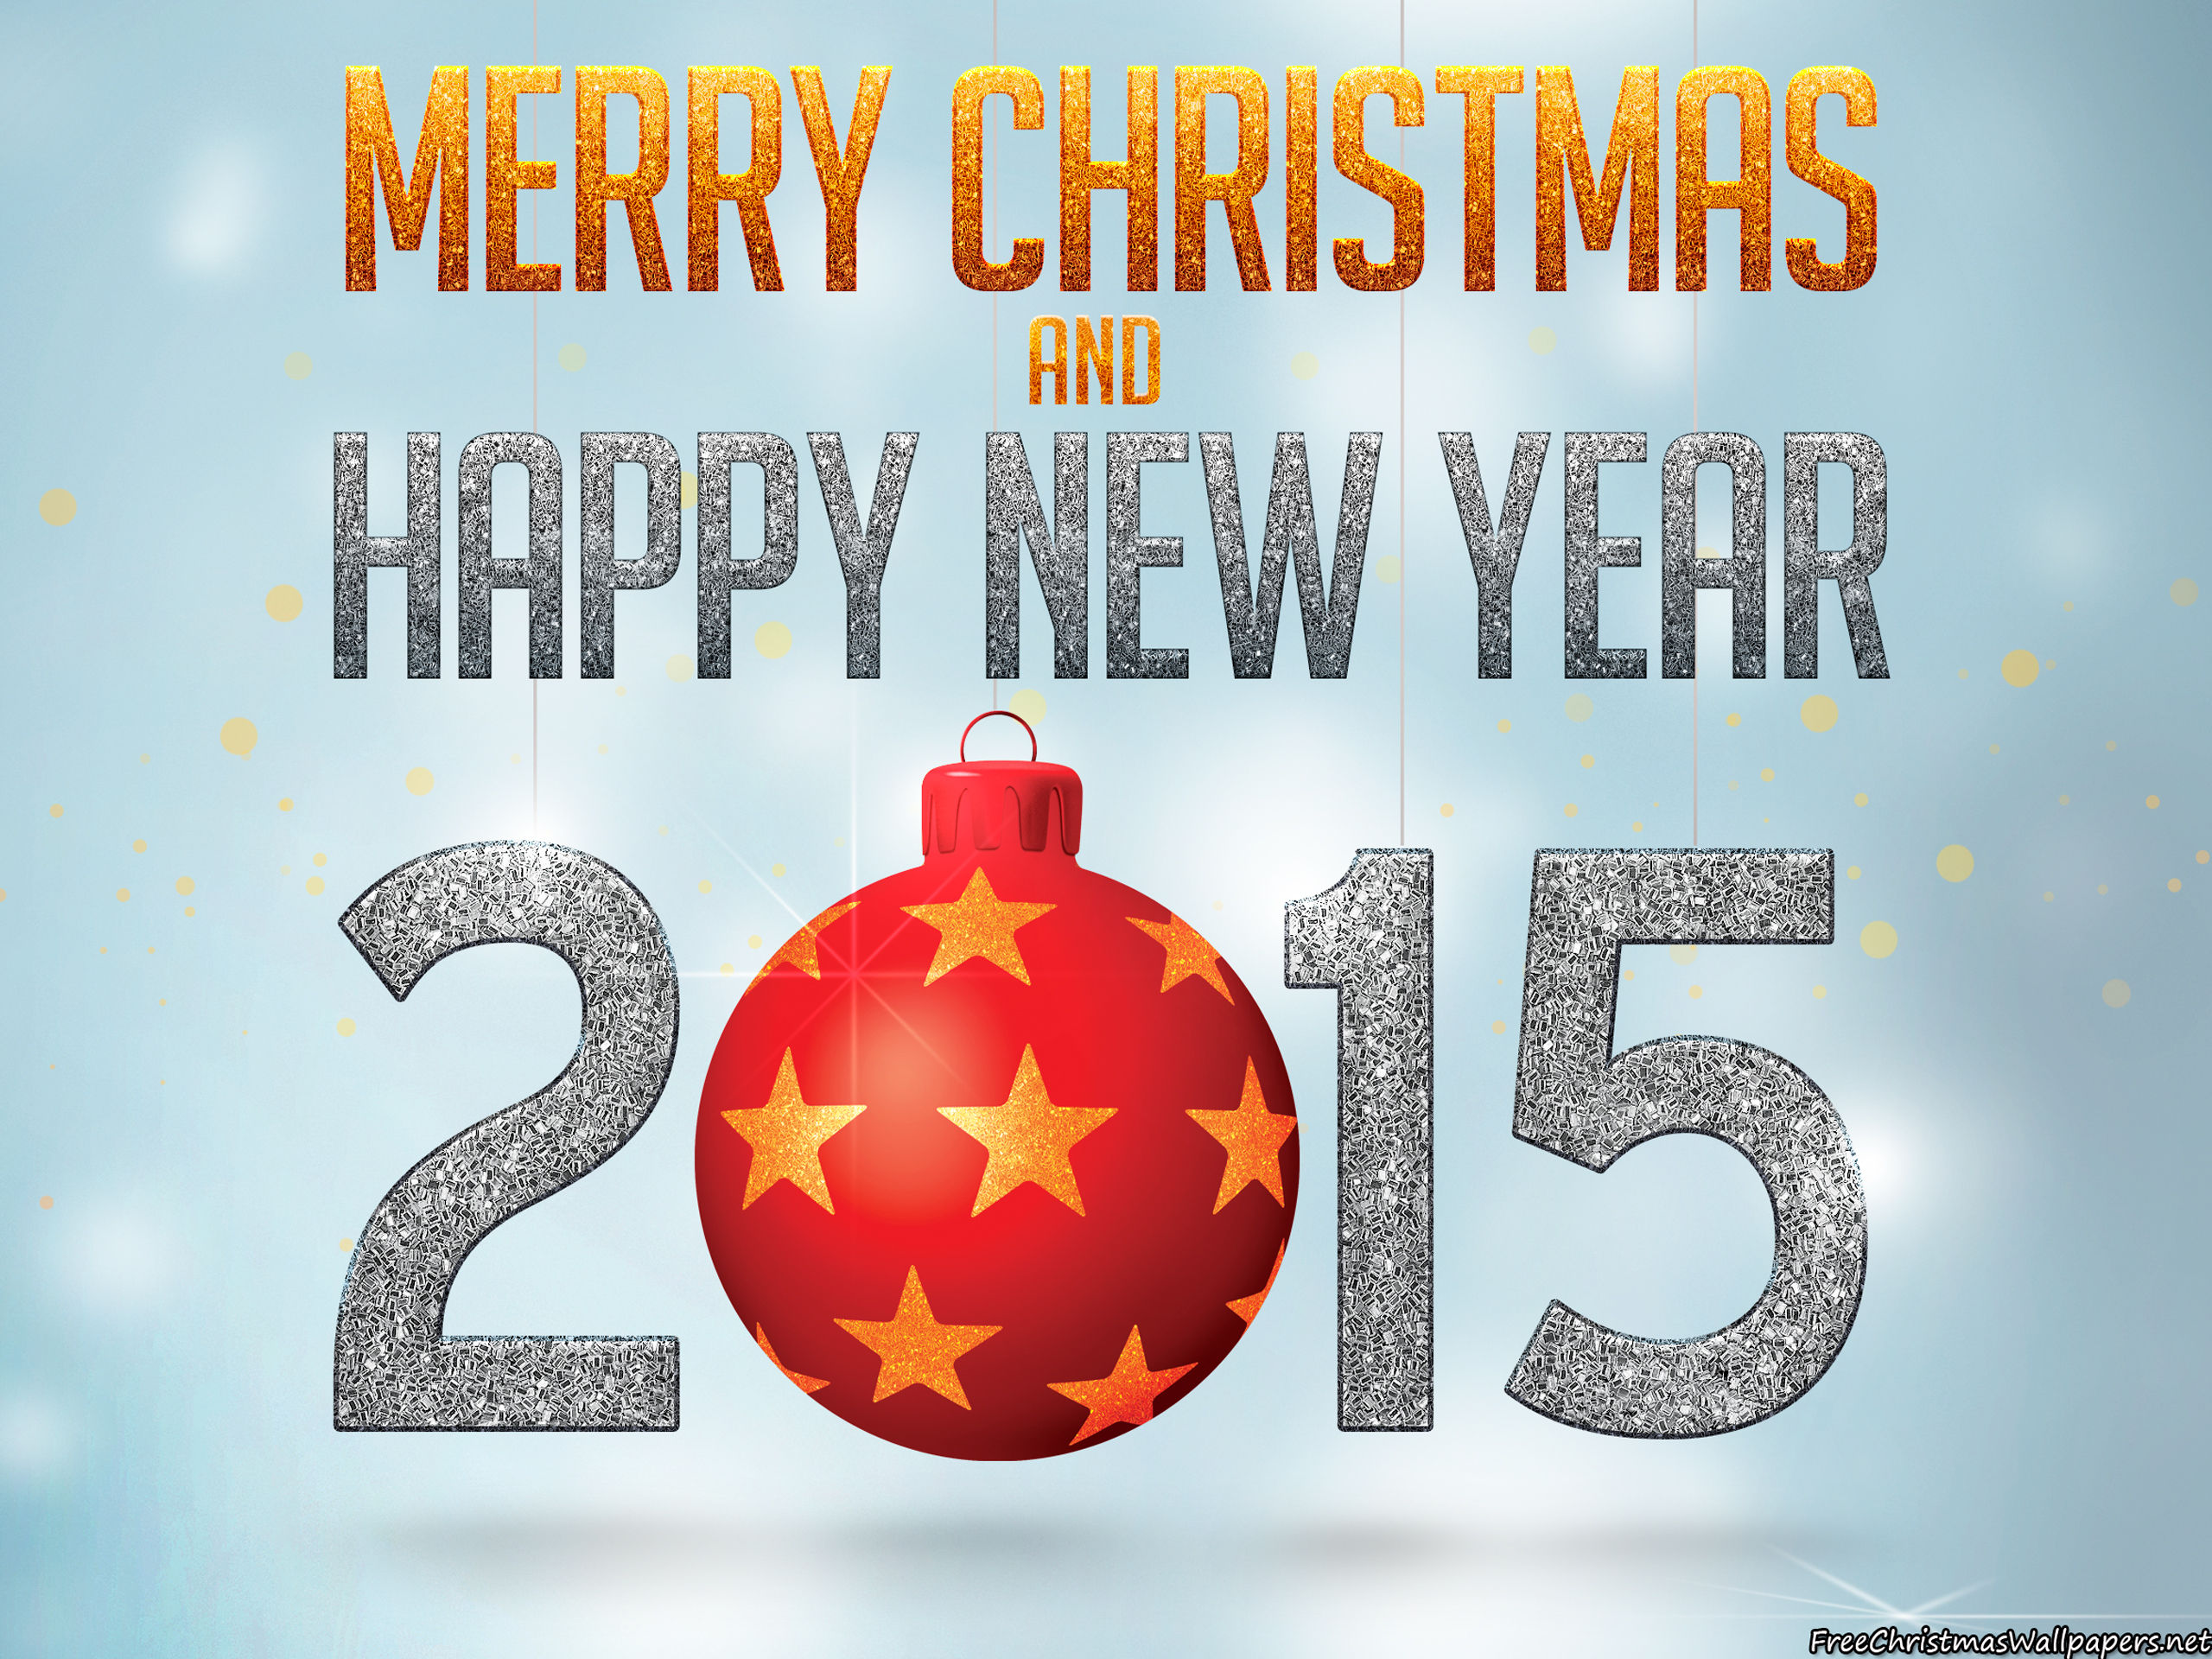 Merry Christmas 2015 Wishes